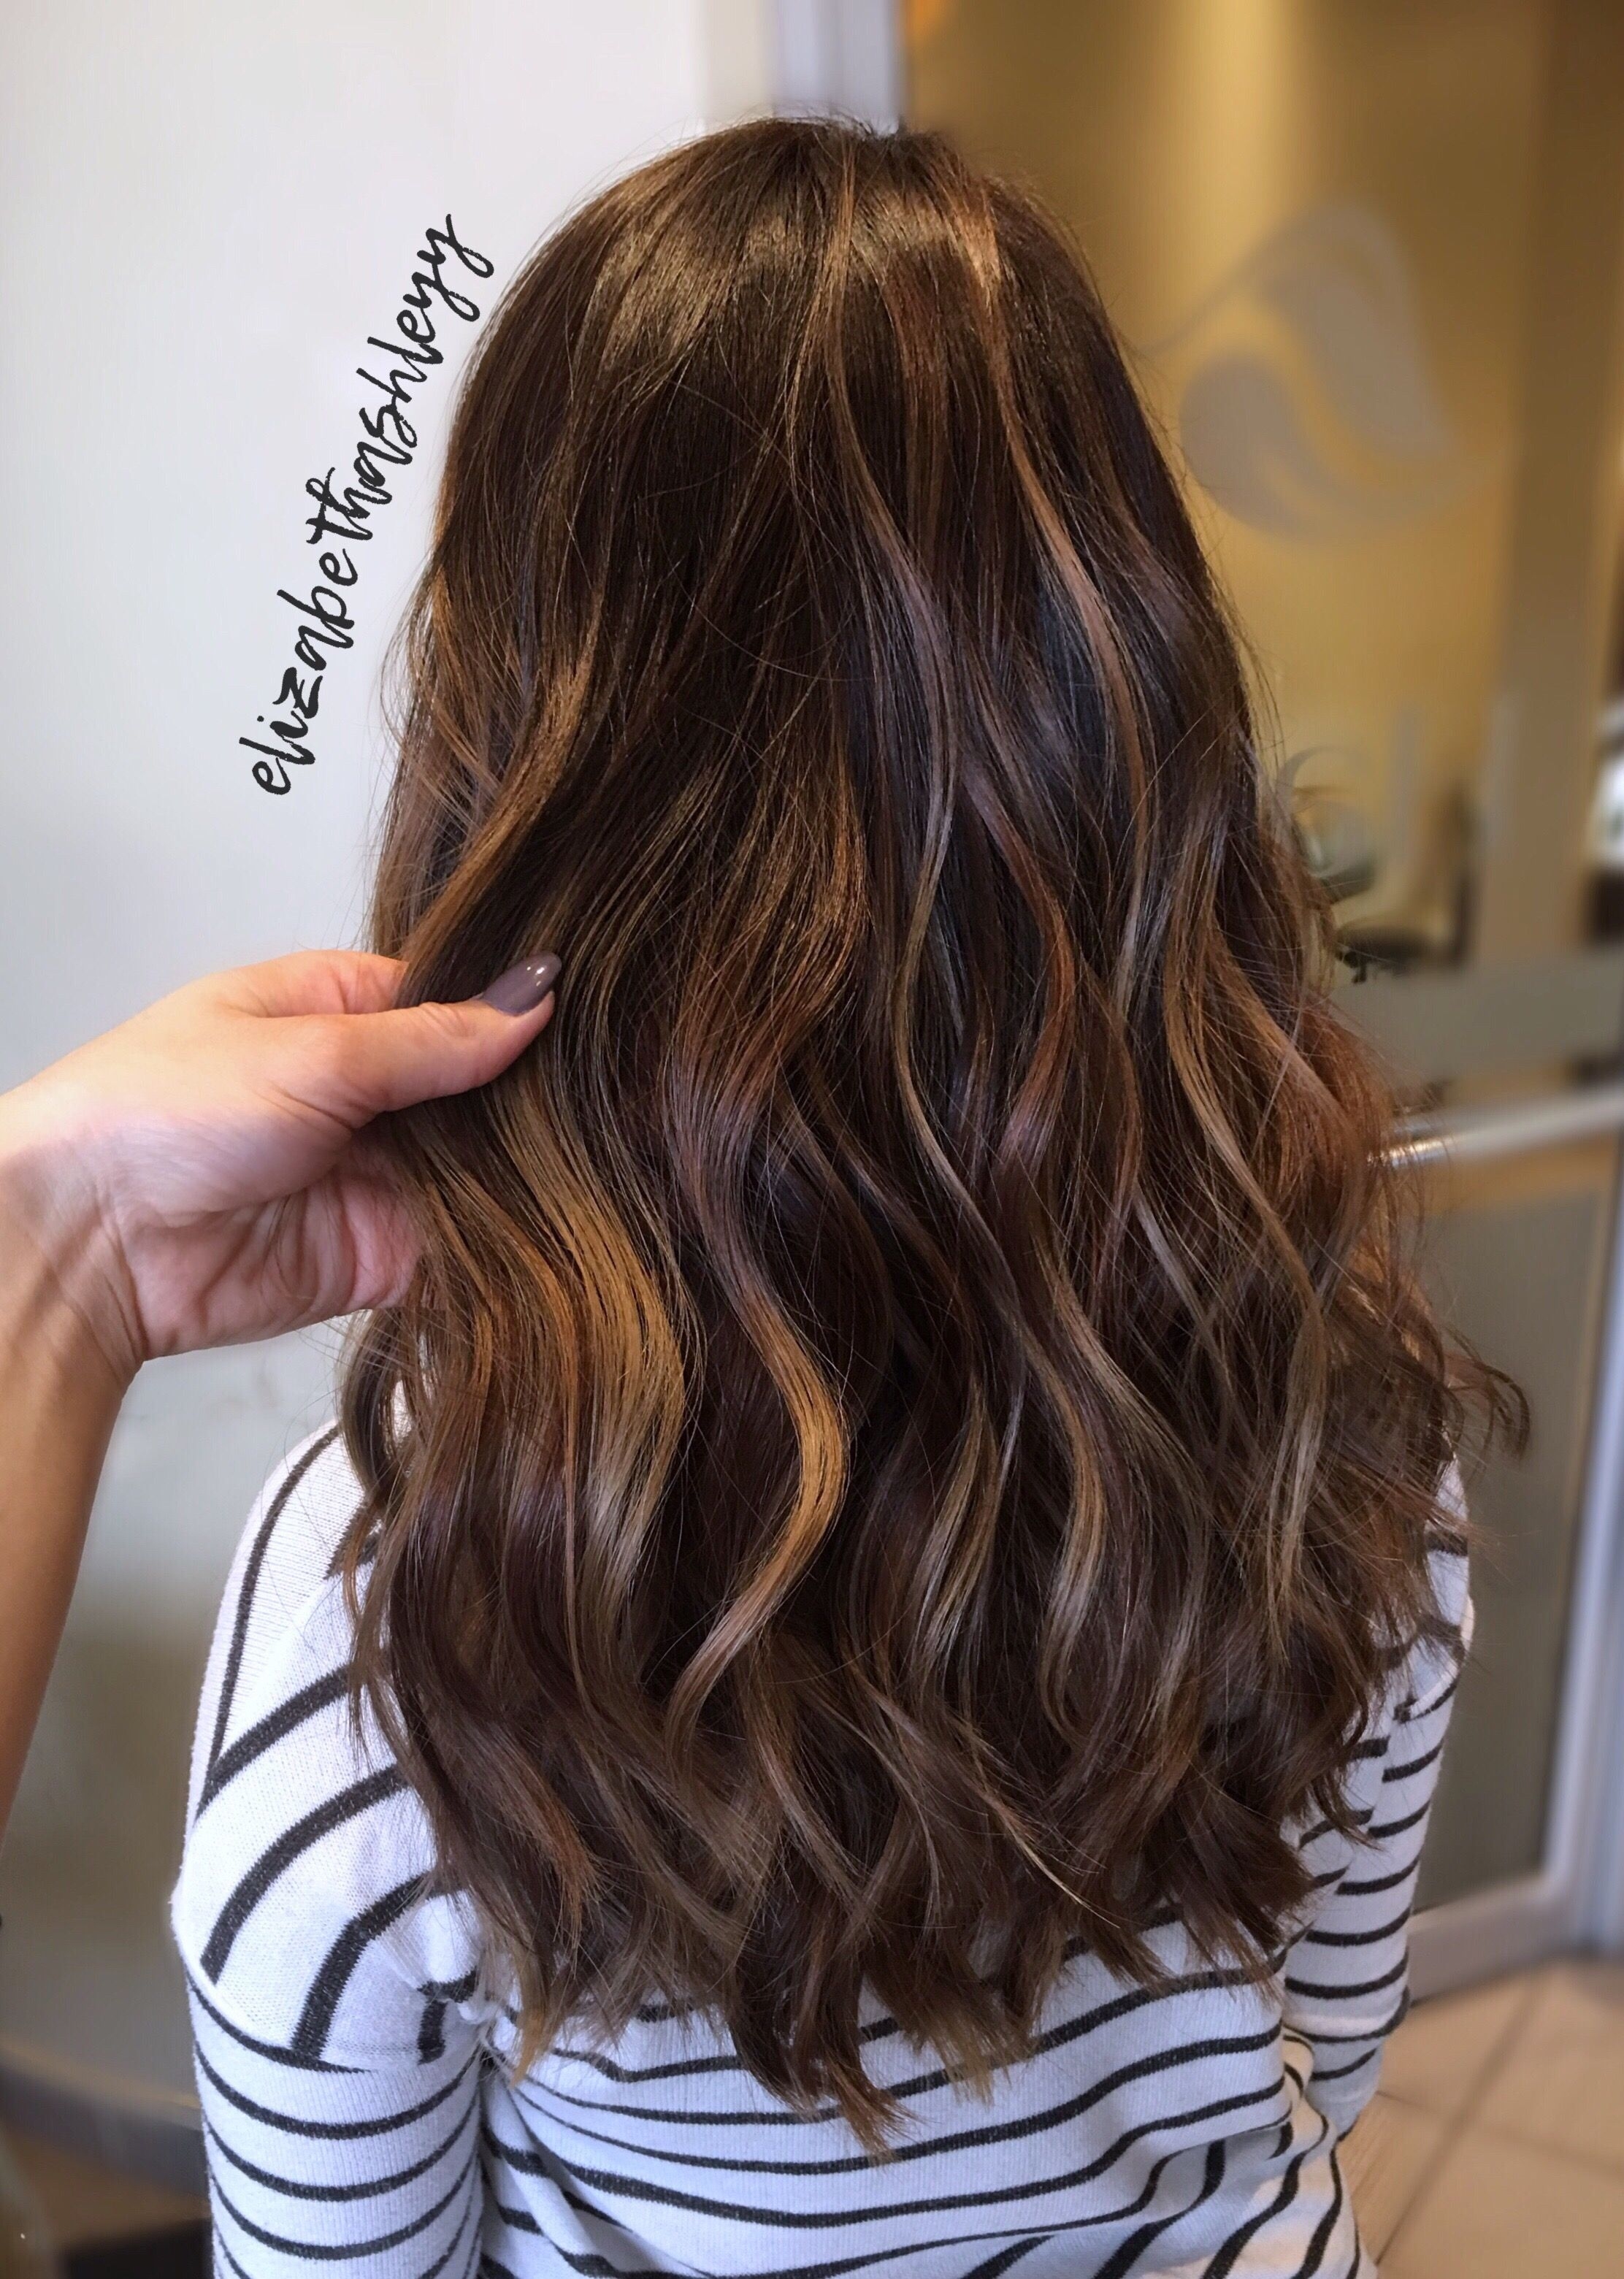 Classic Balayage On Asian Hair | Low Maintence Balayage Highlight throughout Asian Hairstyles With Highlights